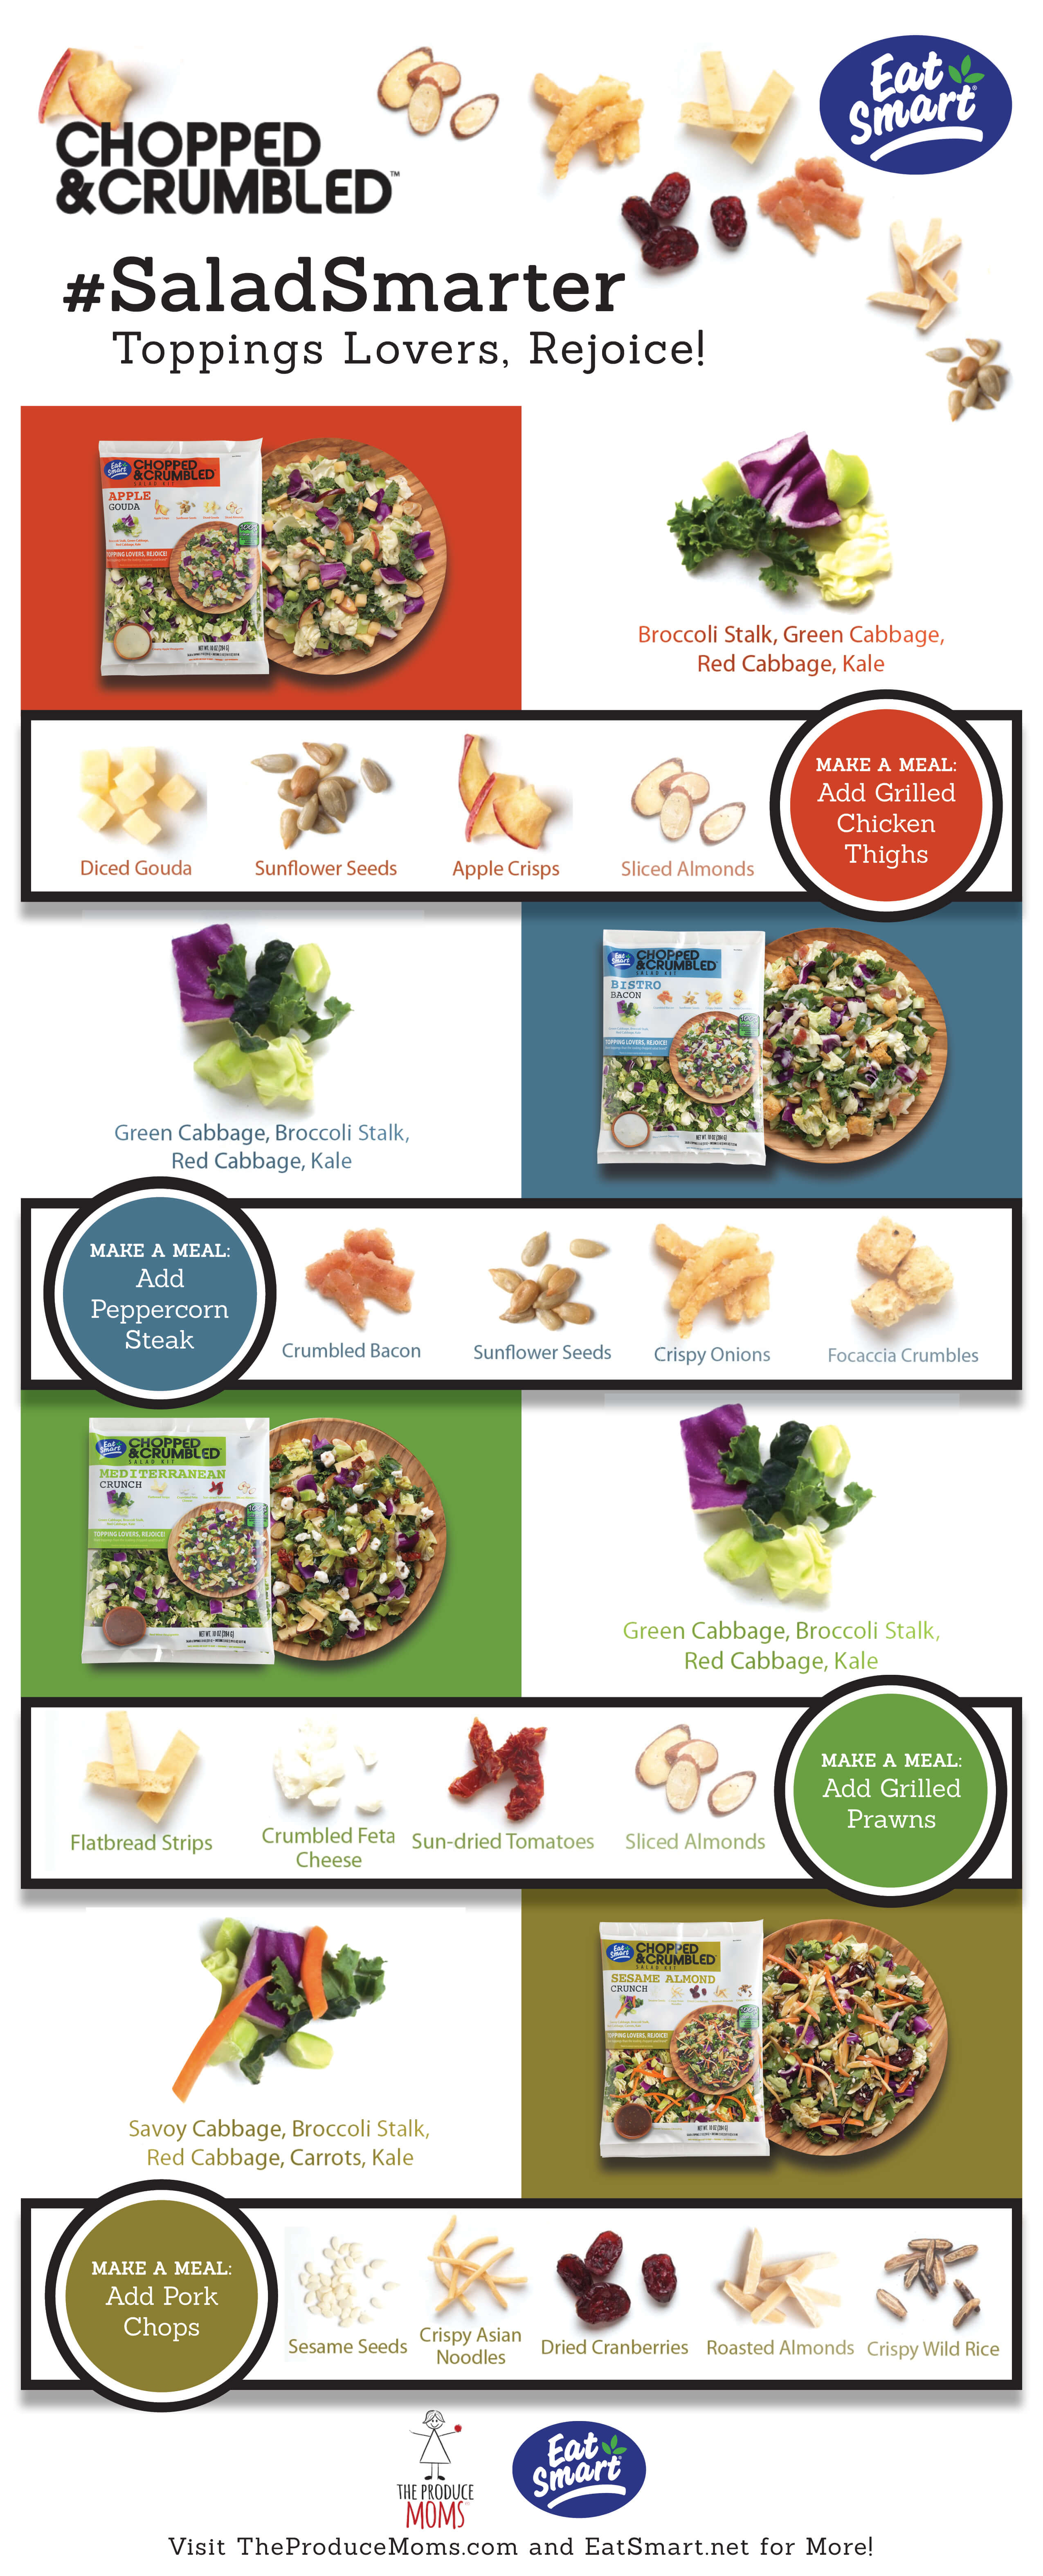 Easy to Eat Smart® with Chopped & Crumbled™ Salad Kits